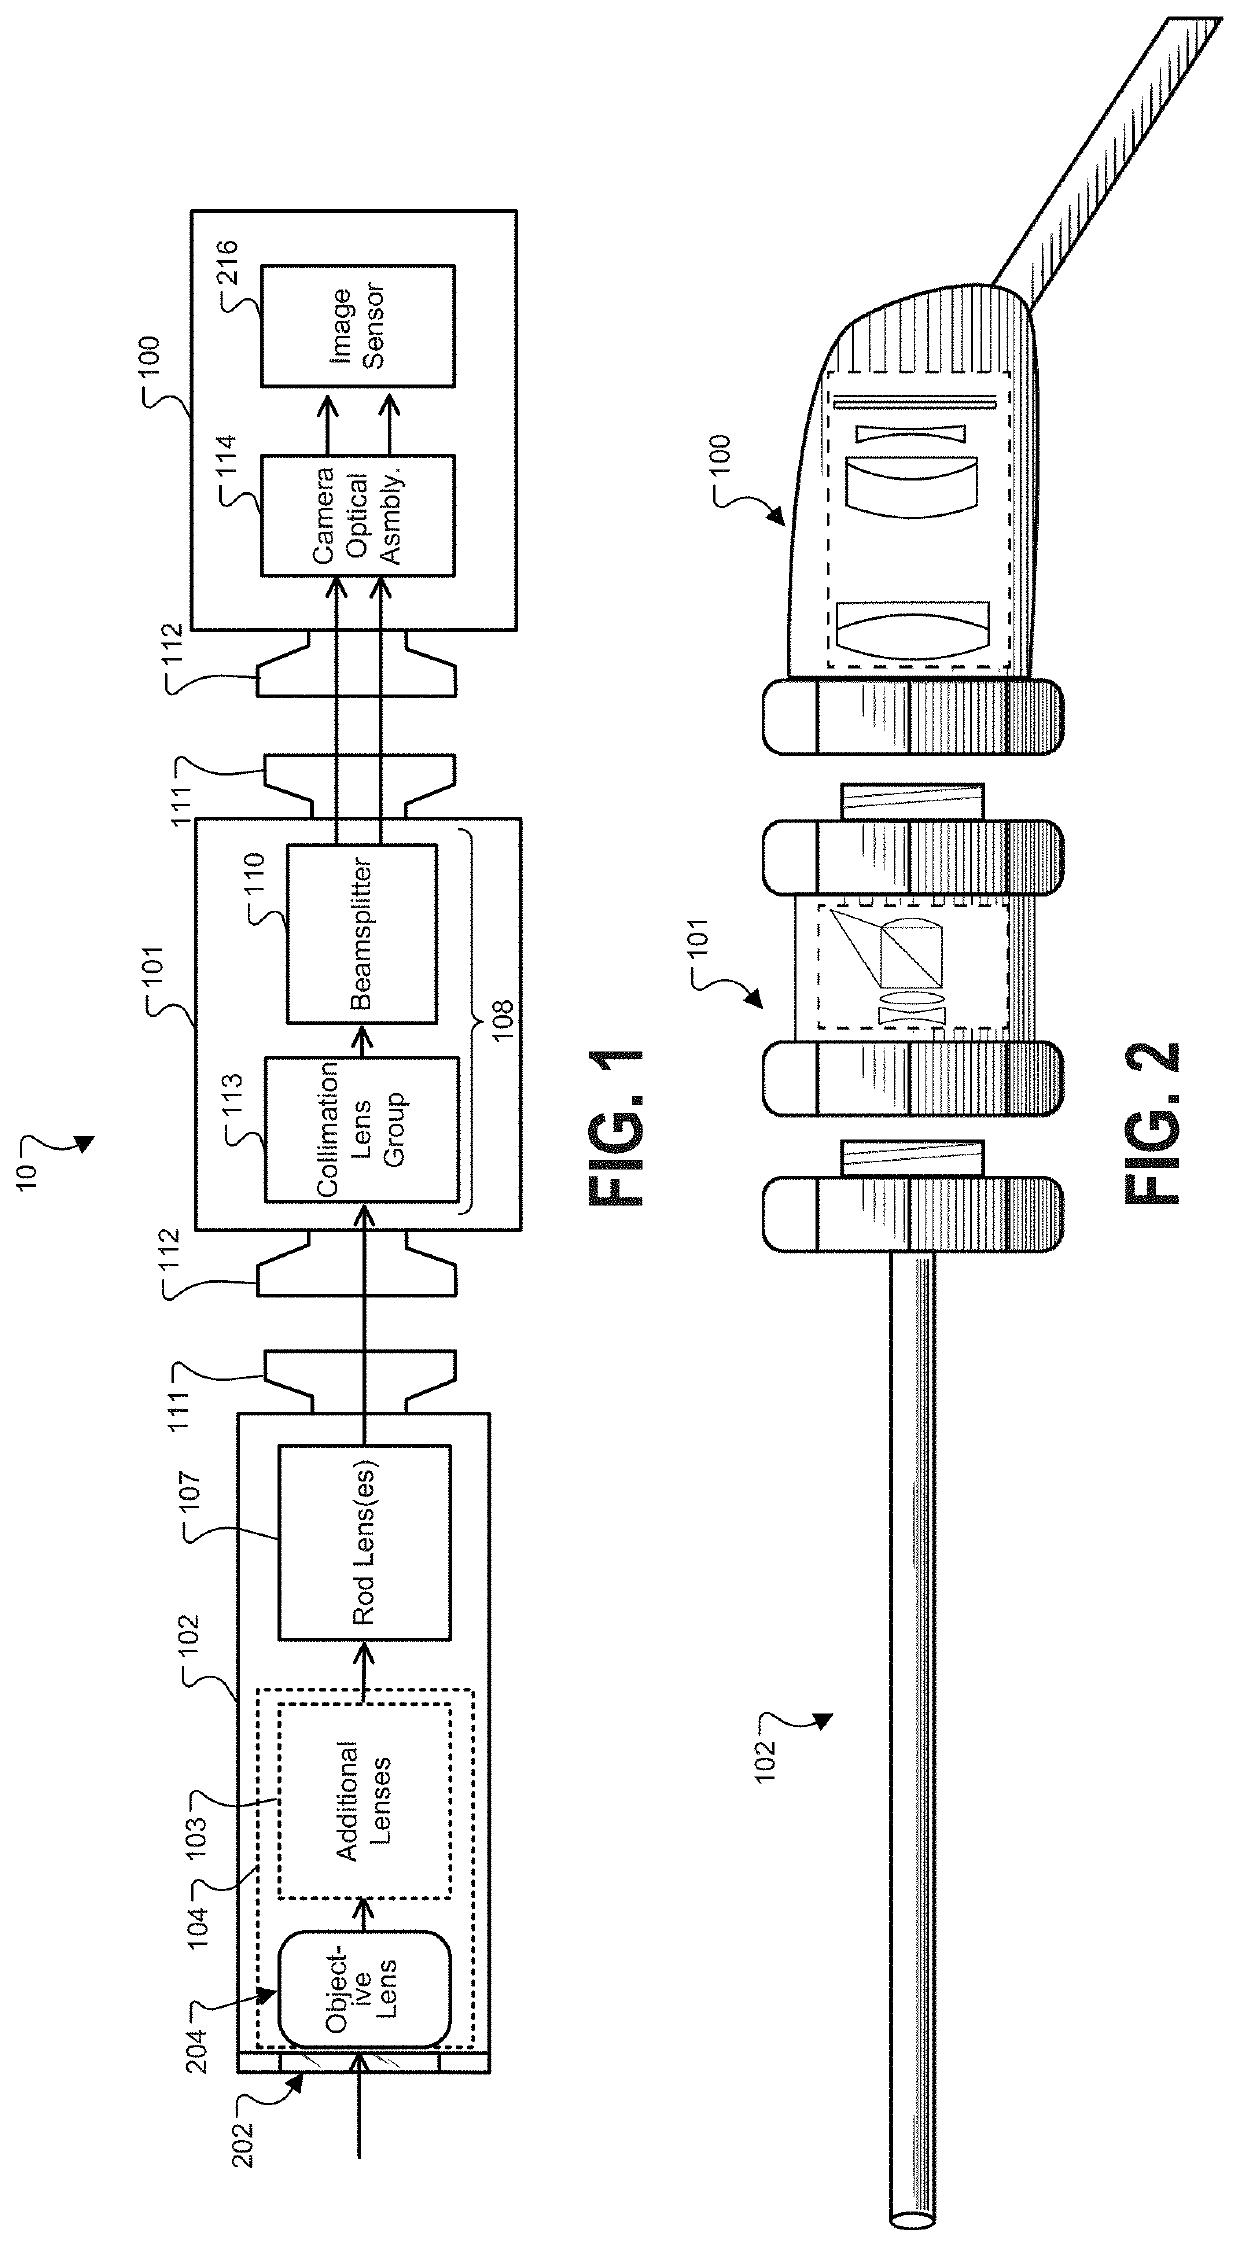 Attachment System For Conditioning Light Between Endoscope And Camera